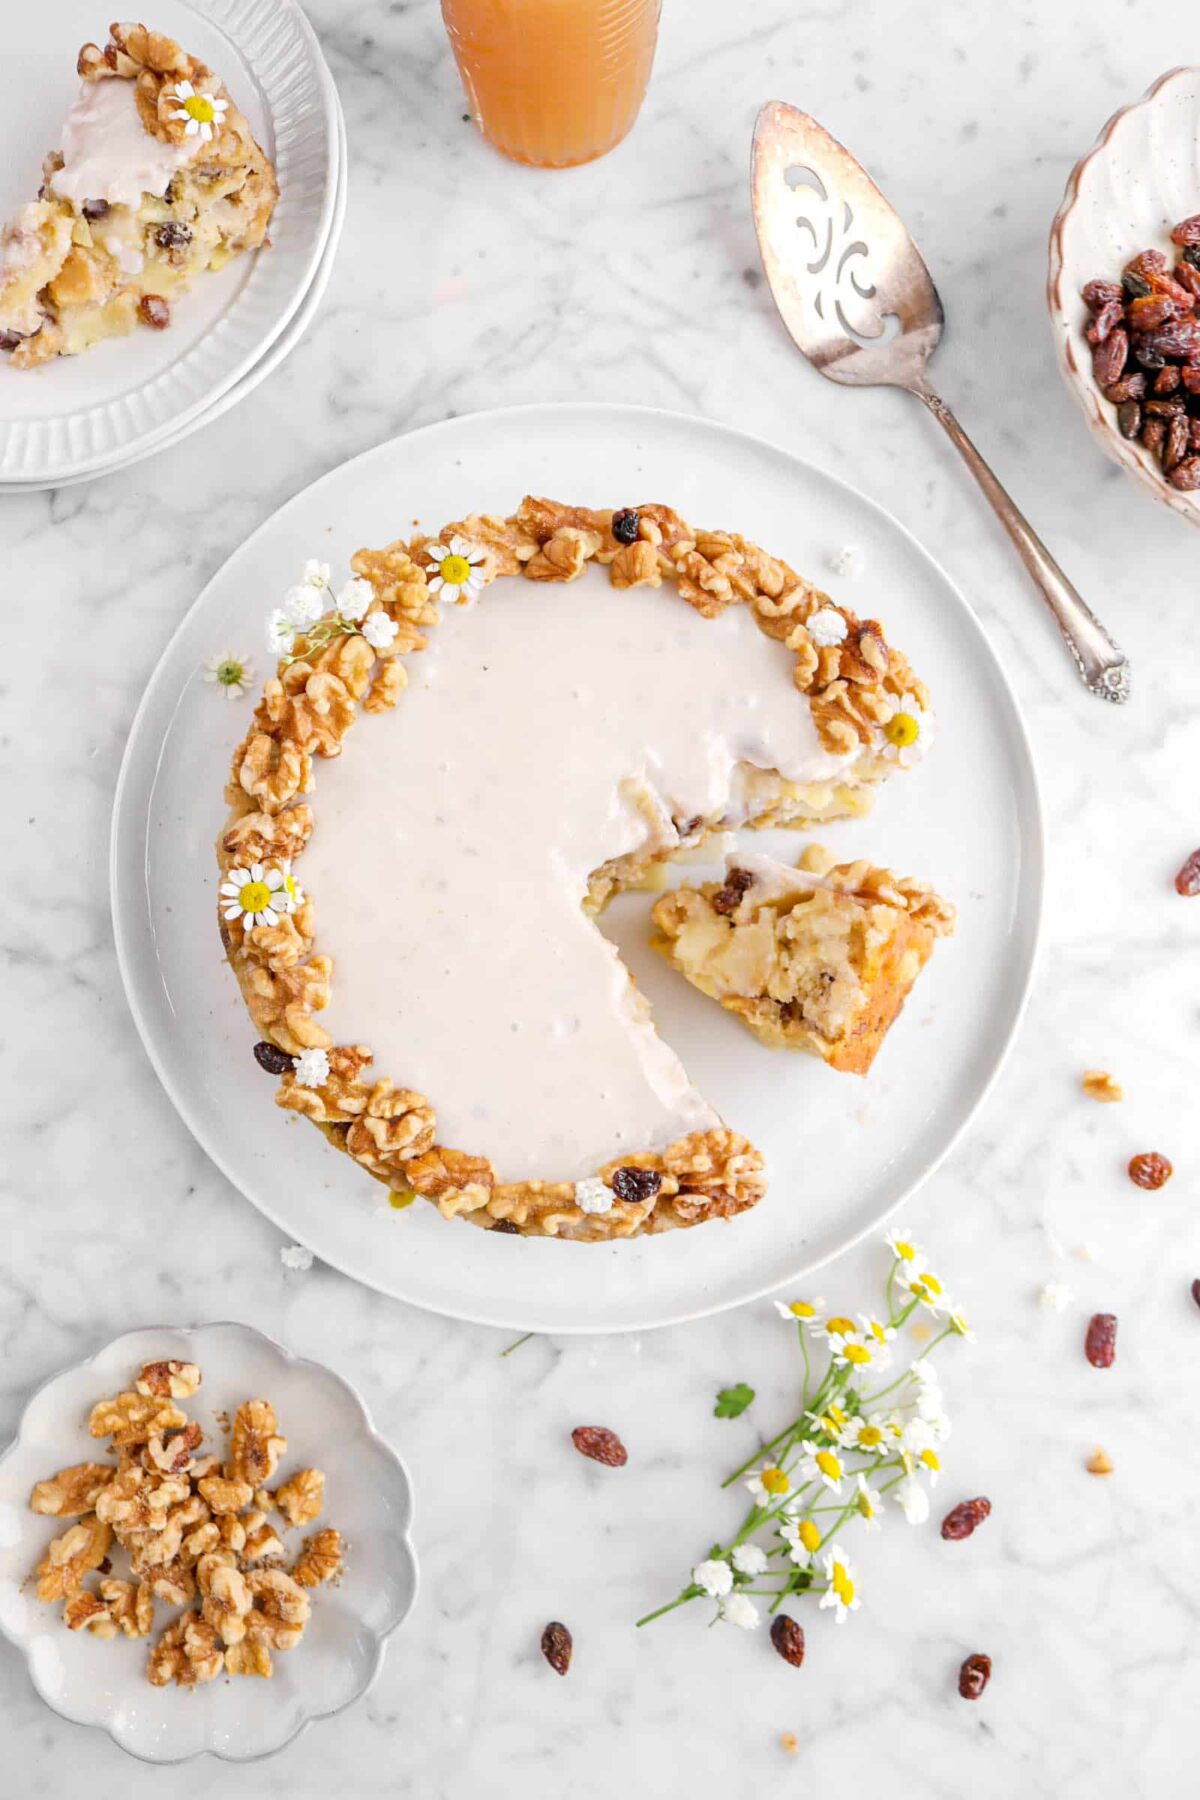 cake with slice on its side, walnuts, raisins, and flowers around white plate